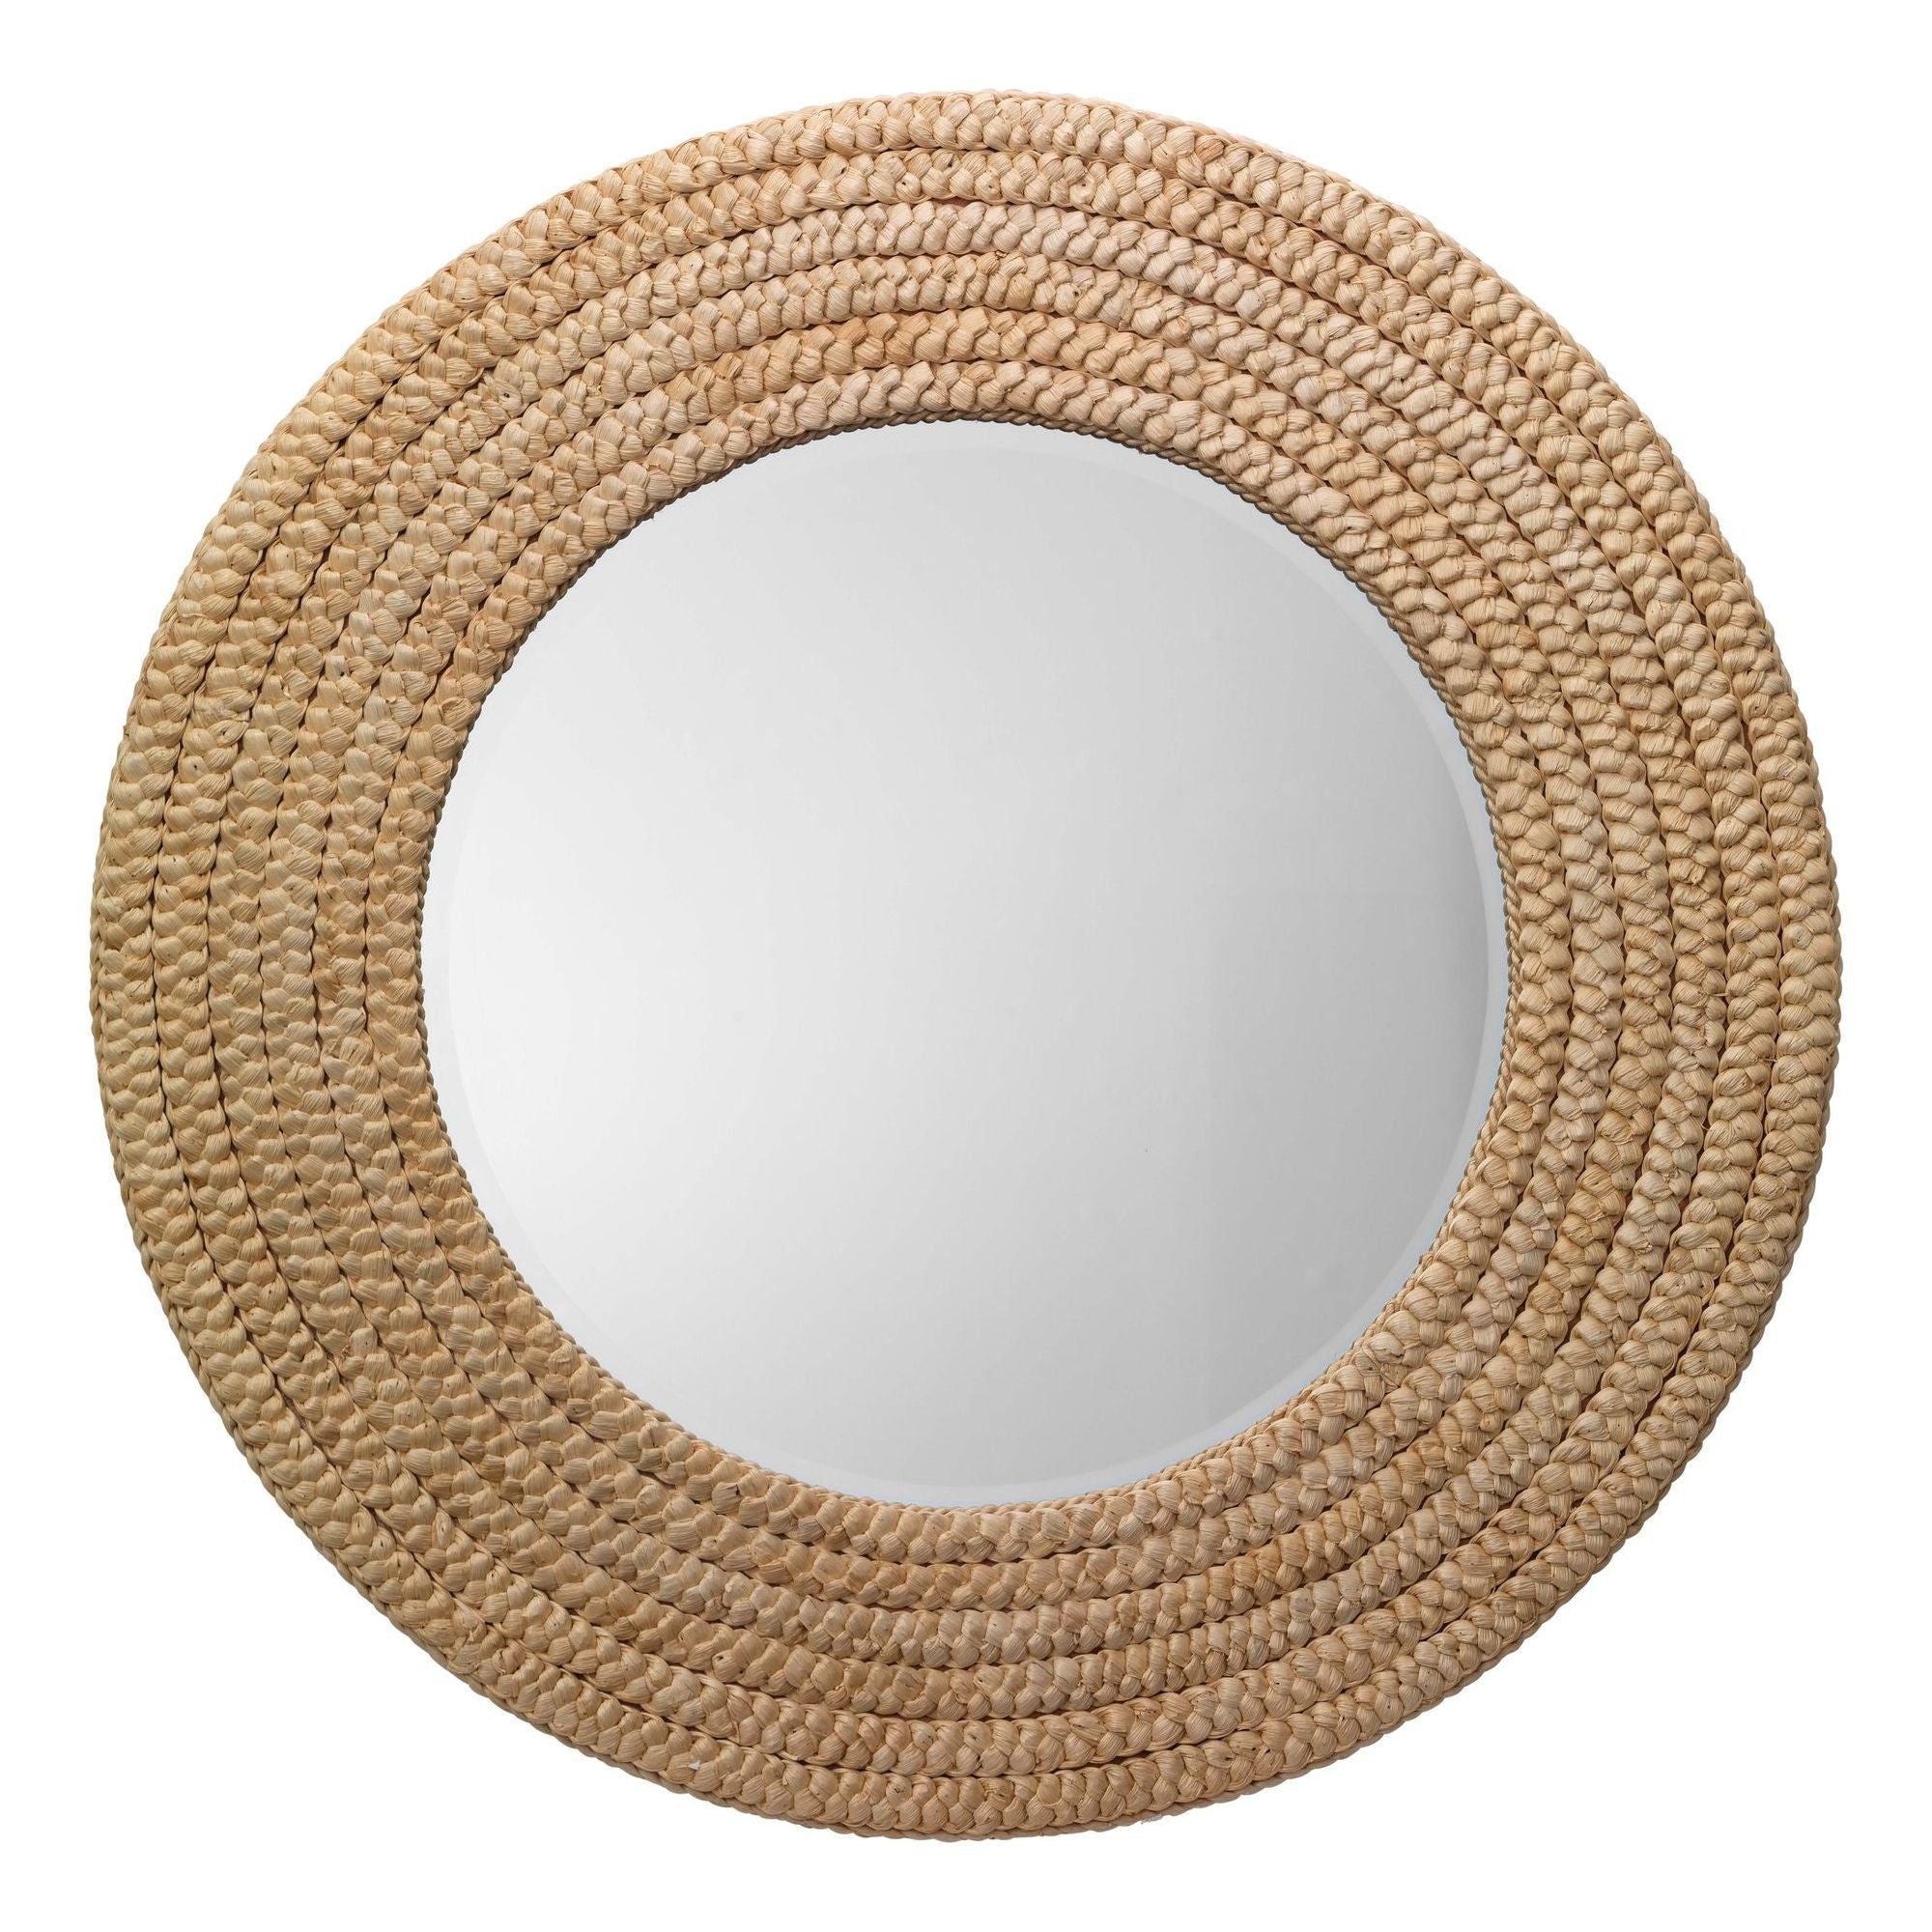 Jamie Young Company - LS6MEADMISG - Meadow Mirror -  - Natural